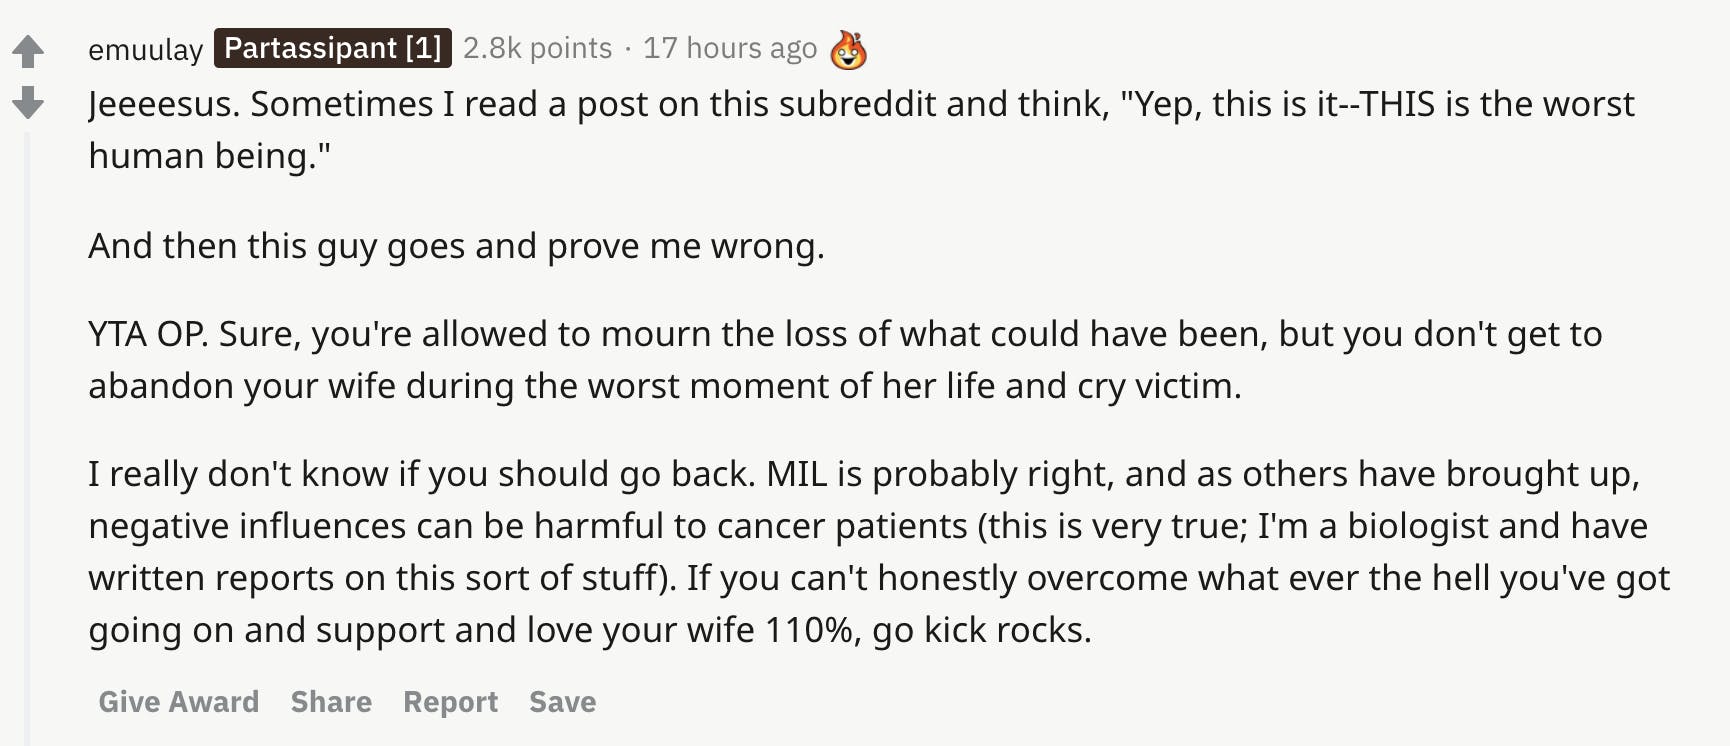 Jeeeesus. Sometimes I read a post on this subreddit and think, "Yep, this is it--THIS is the worst human being."  And then this guy goes and prove me wrong.  YTA OP. Sure, you're allowed to mourn the loss of what could have been, but you don't get to abandon your wife during the worst moment of her life and cry victim.  I really don't know if you should go back. MIL is probably right, and as others have brought up, negative influences can be harmful to cancer patients (this is very true; I'm a biologist and have written reports on this sort of stuff). If you can't honestly overcome what ever the hell you've got going on and support and love your wife 110%, go kick rocks.